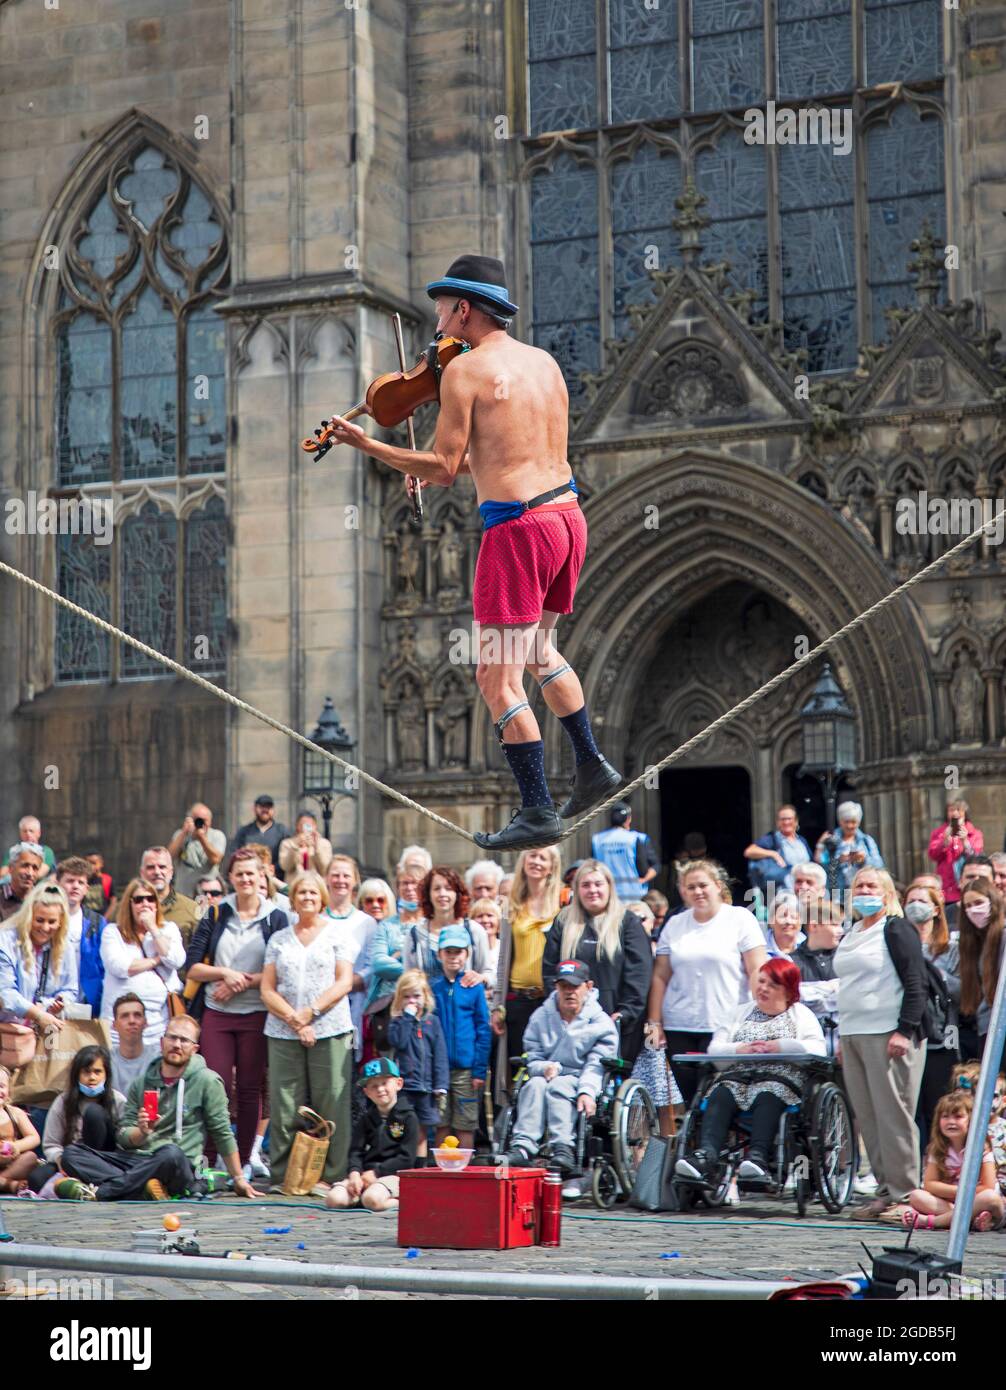 Royal Mile, Edinburgh, Scotland, UK. 12th Aug, 2021. Edinburgh Fringe Festival, day seven of the goings on on the capital city High Street event. Weather breezy and cloudy with temperature of 18 degrees for the human statues and street performers drawing crowds to their pitches. Pictured: Kwabana Lindsay entertains a large audience on Parliamnet Square. Credit: Arch White/Alamy Live News Stock Photo